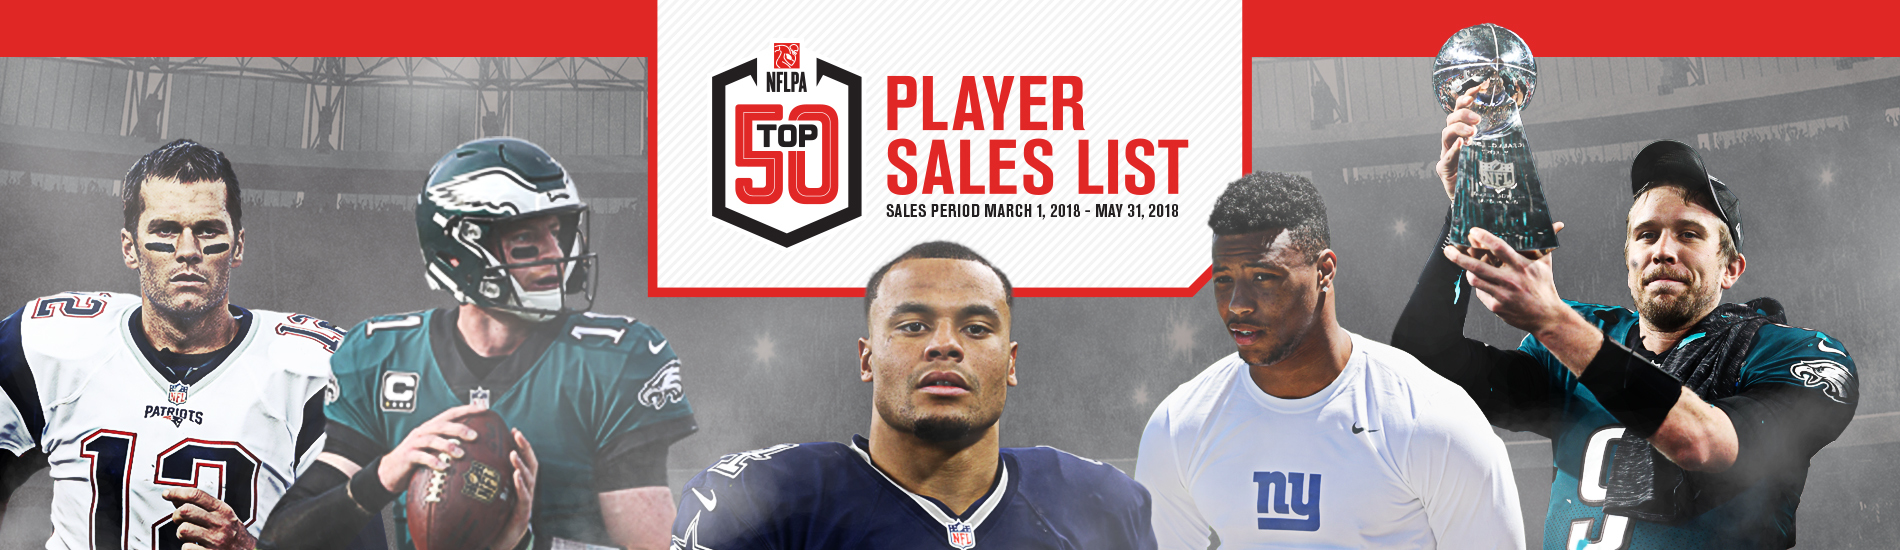 top nfl merchandise sales by player